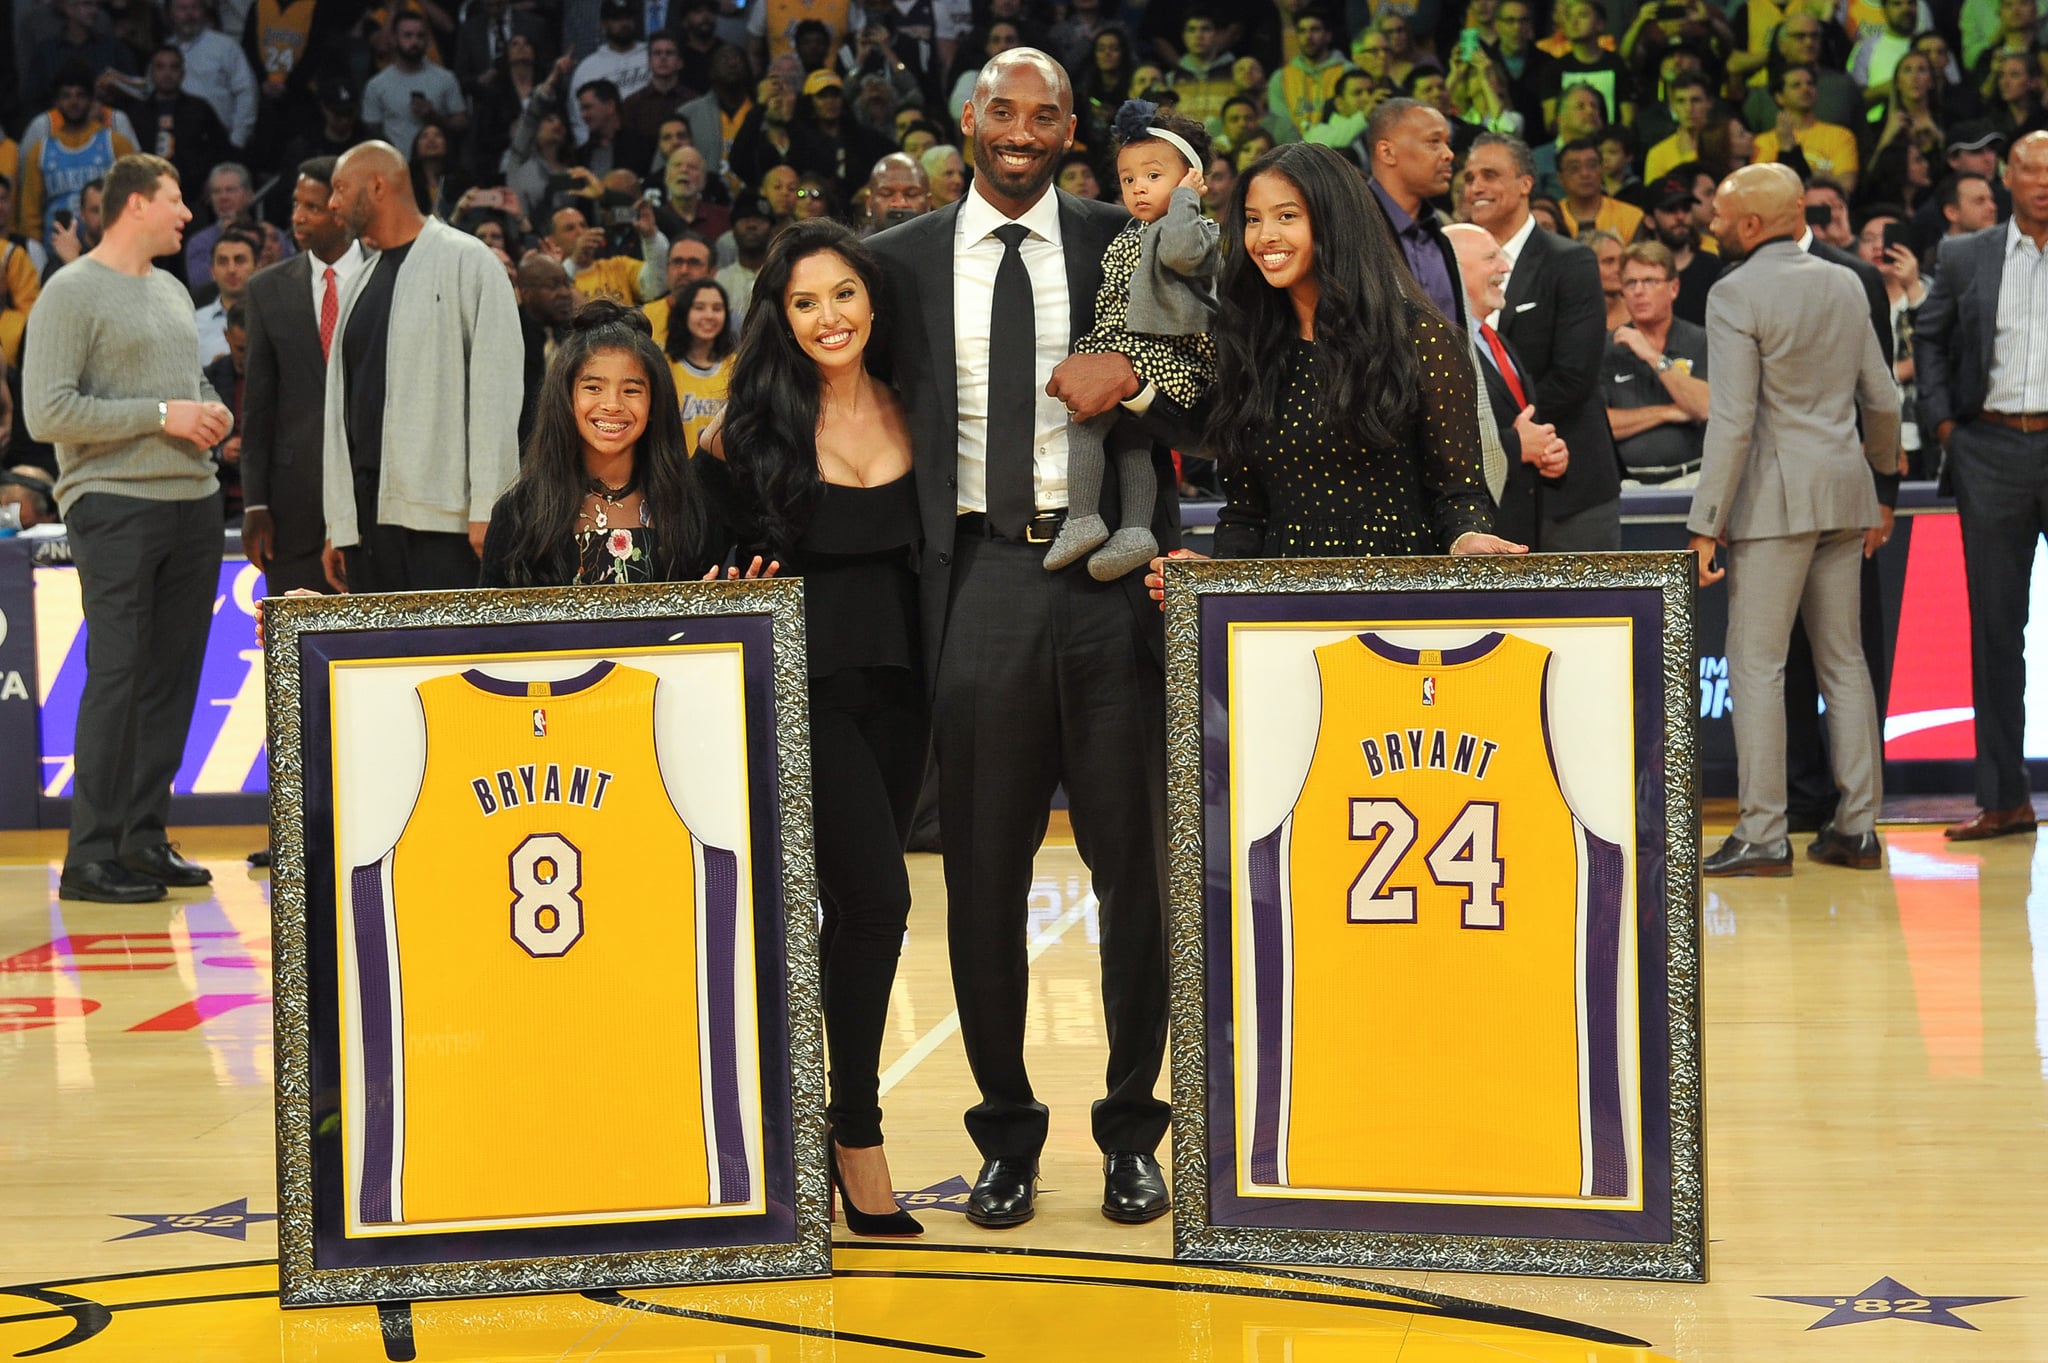 LOS ANGELES, CA - DECEMBER 18: Kobe Bryant, wife Vanessa Bryant and daughters Gianna Maria Onore Bryant, Natalia Diamante Bryant and Bianka Bella Bryant attend Kobe Bryant's jersey retirement ceremony during halftime of a basketball game between the Los Angeles Lakers and the Golden State Warriors at Staples Center on December 18, 2017 in Los Angeles, California.  (Photo by Allen Berezovsky/Getty Images)